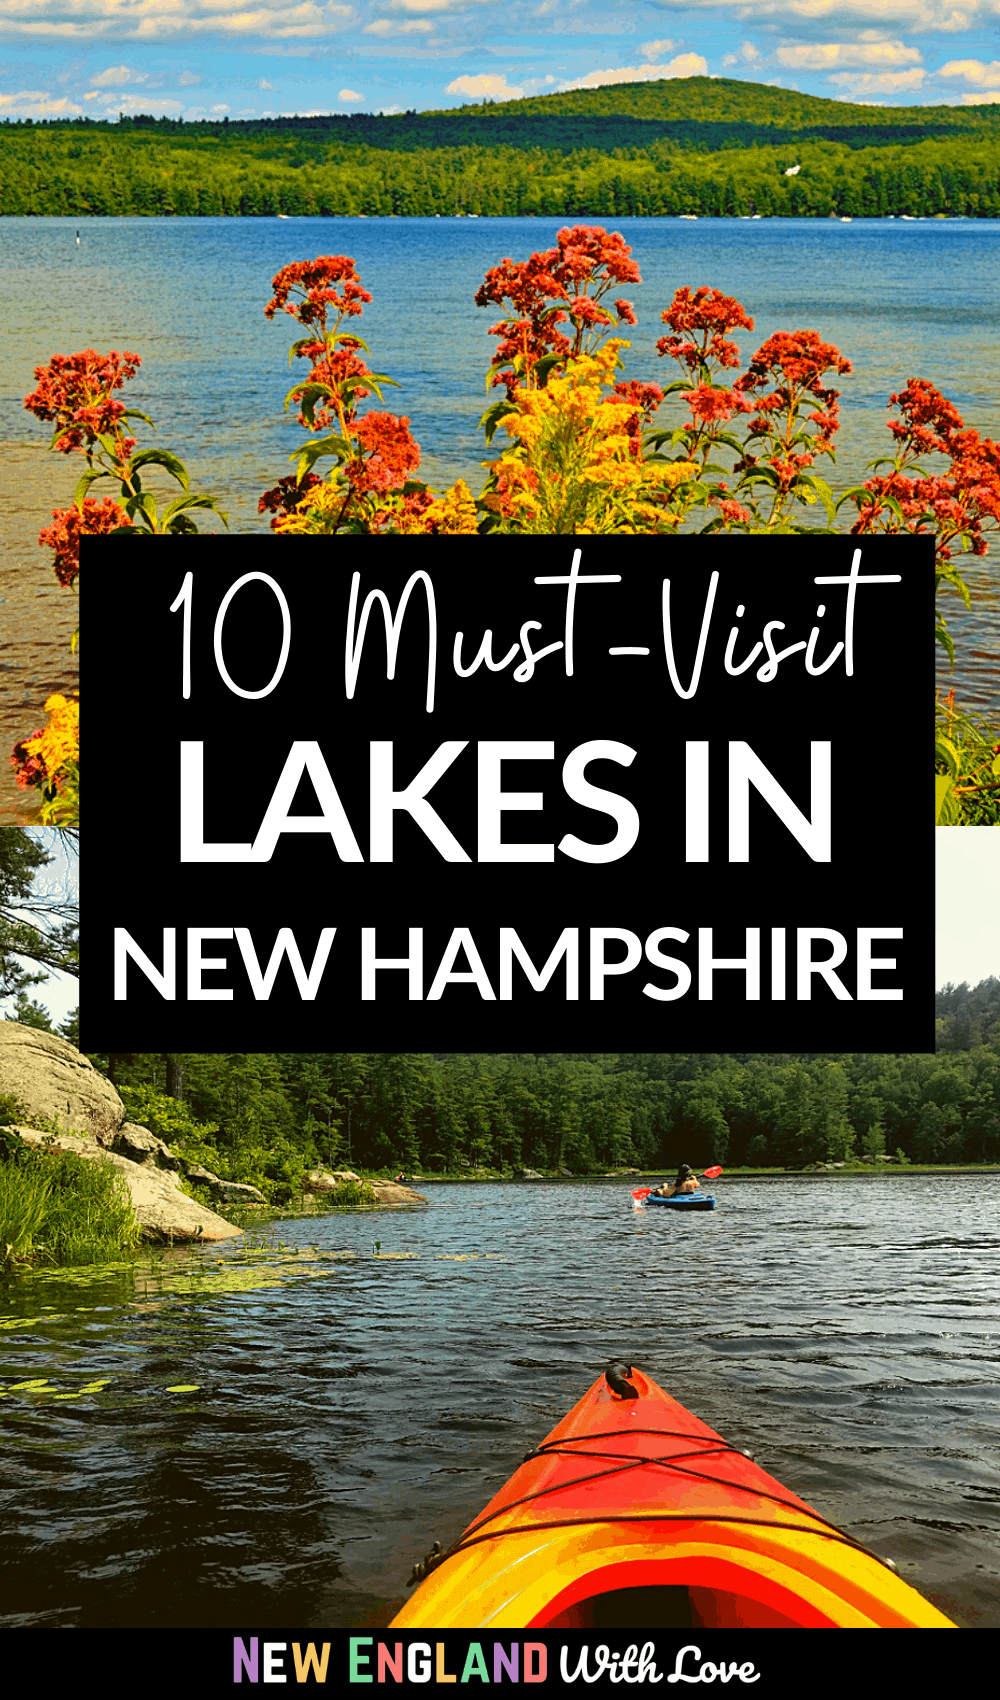 Pinterest graphic reading "10 Must-Visit LAKES IN NEW HAMPSHIRE"